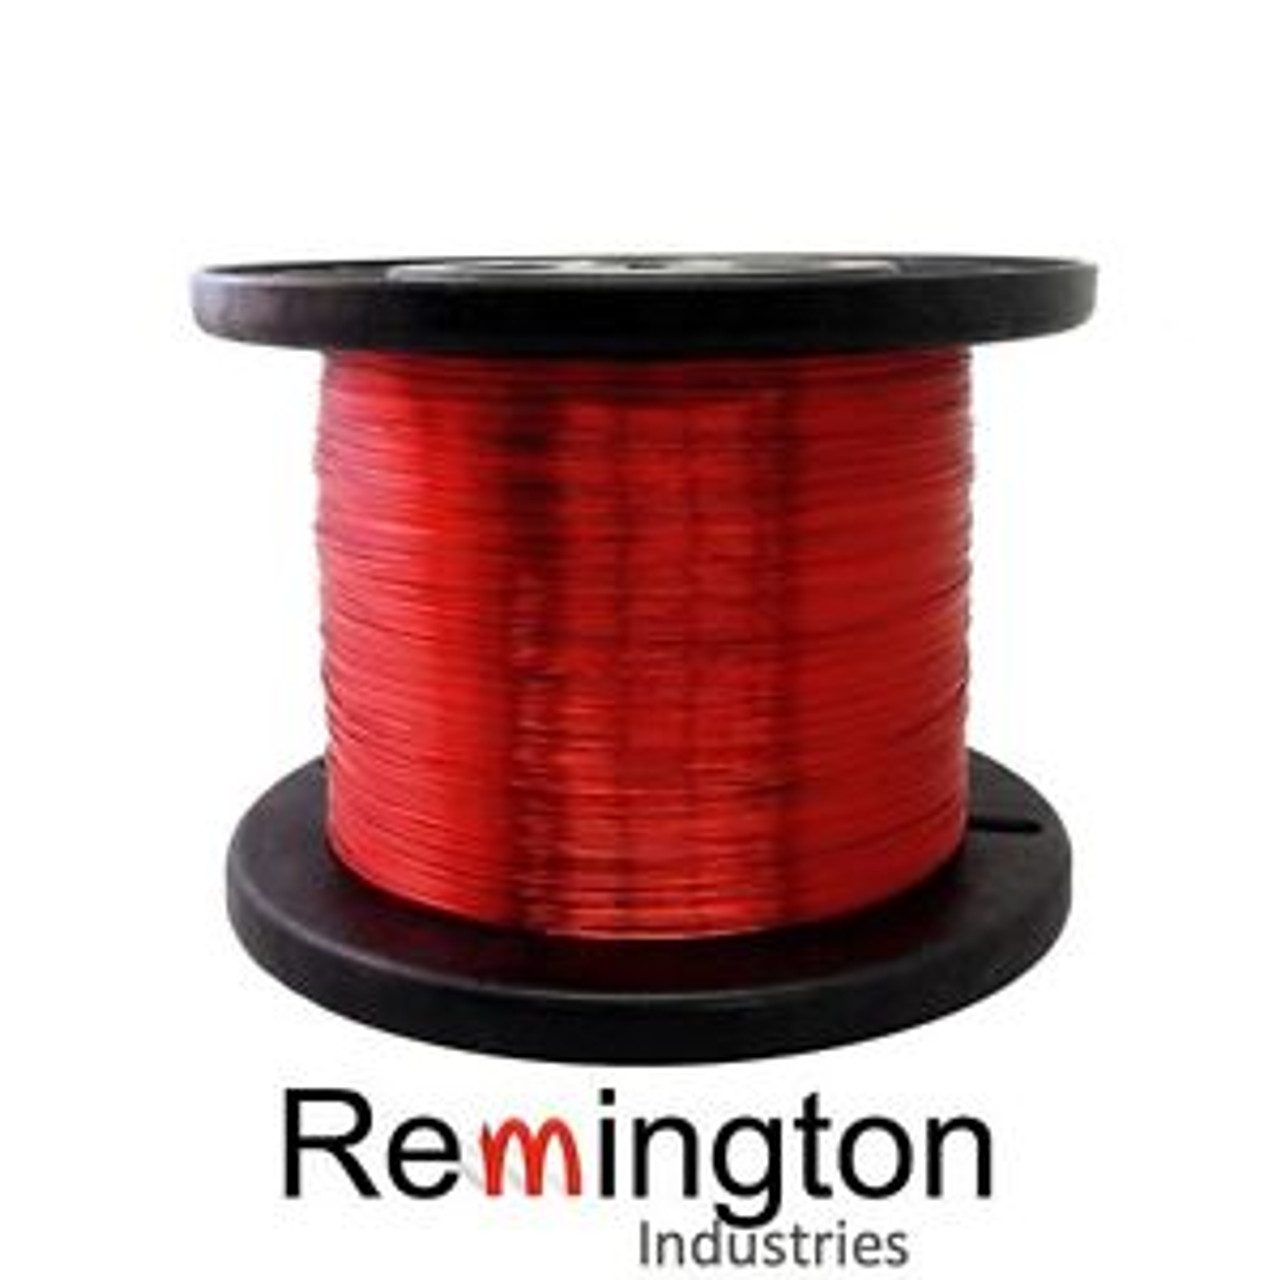 19 AWG Gauge Enameled Copper Magnet Wire 1.0 lbs 253' Length 0.0370" 155C Red 